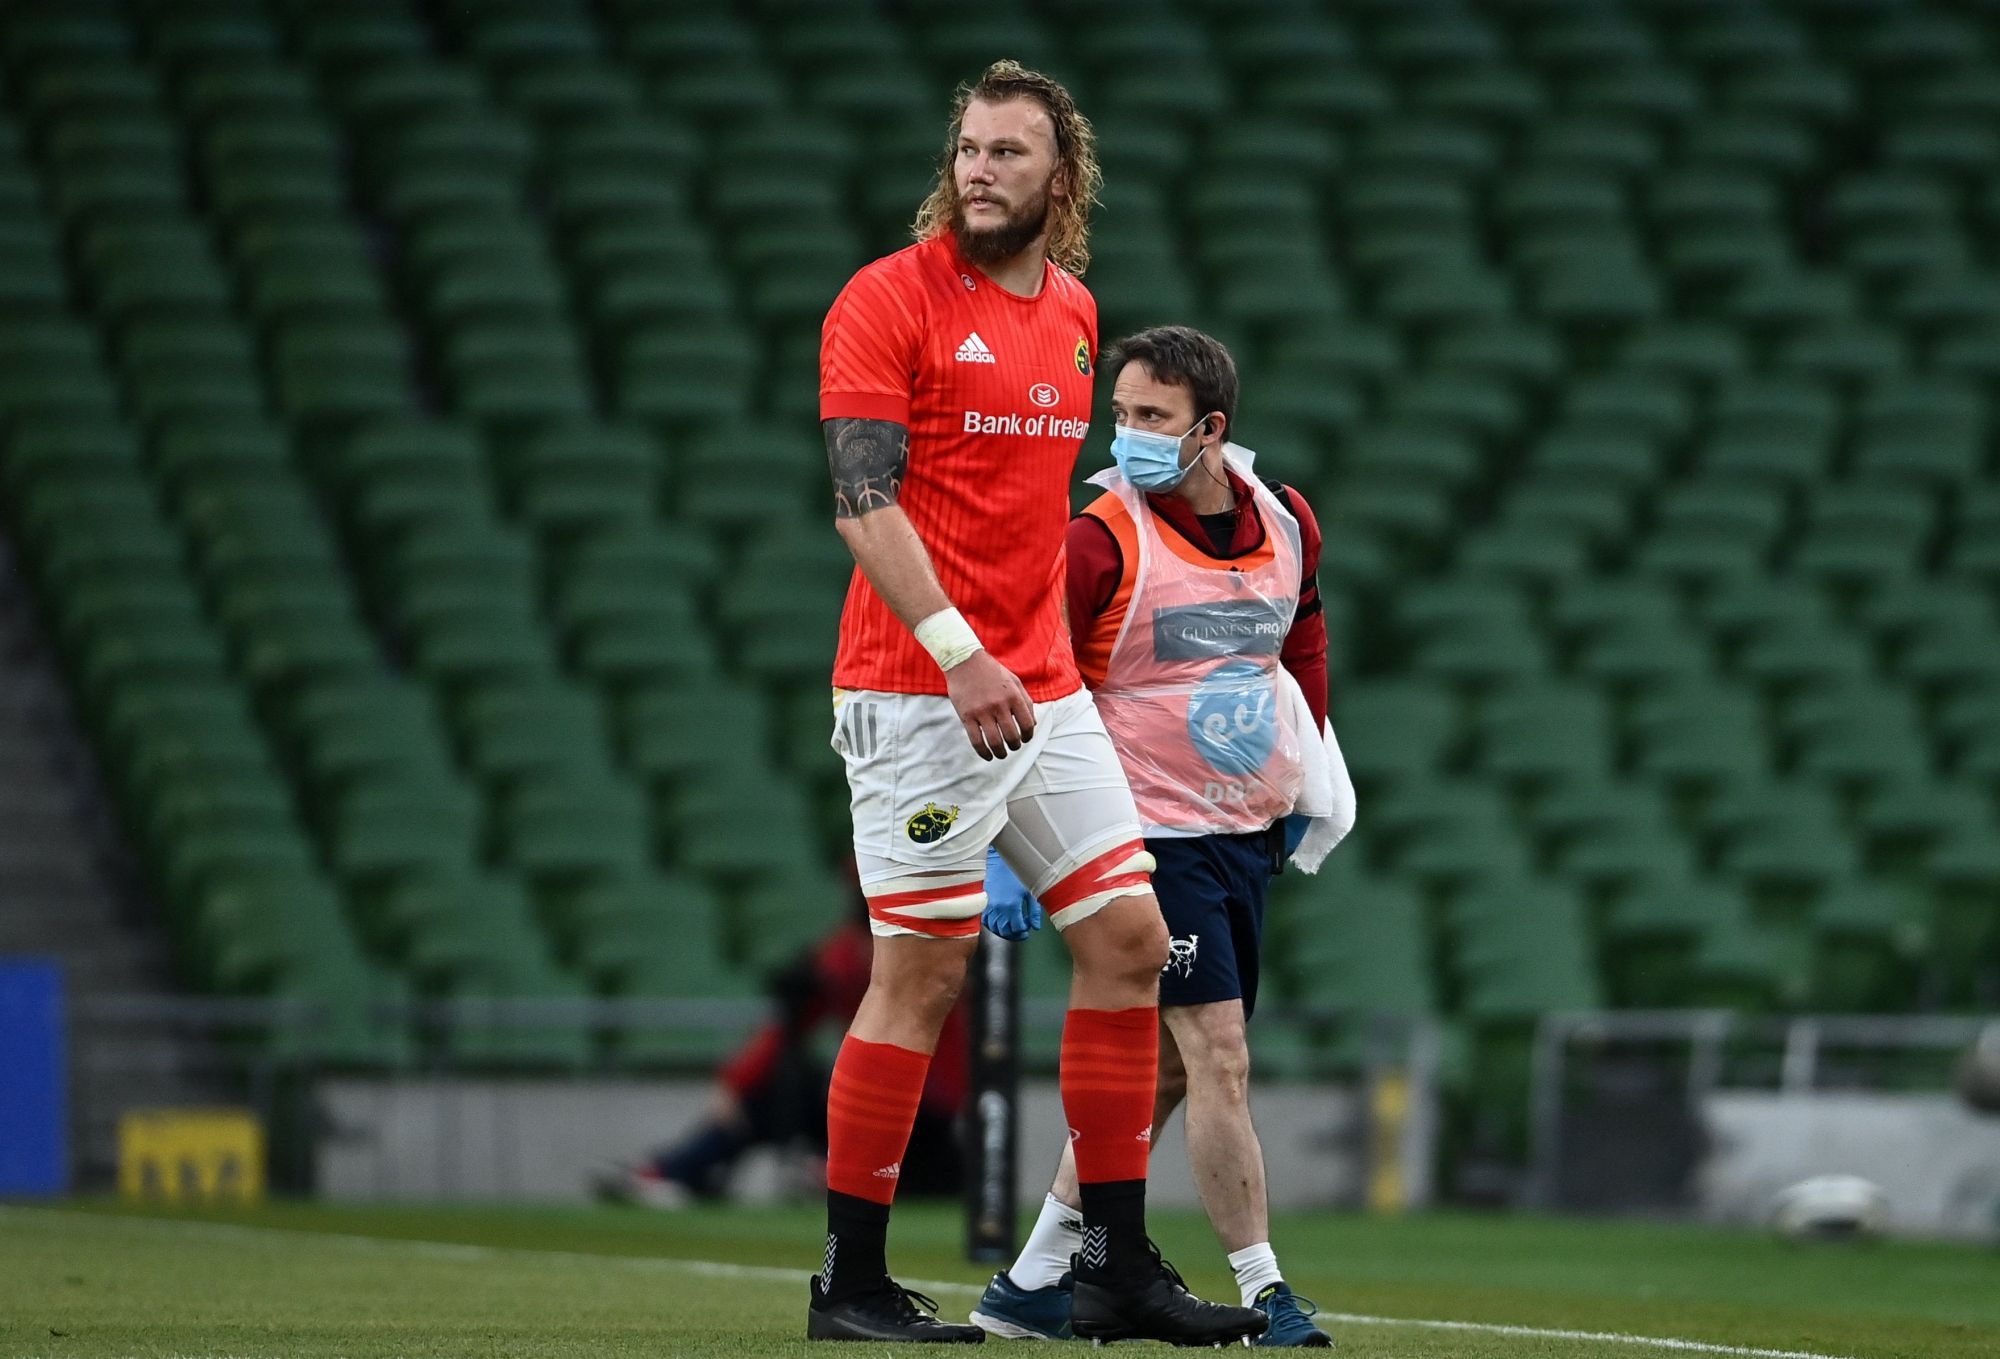 Seven minutes into rugby's return, Munster hit with injury ...